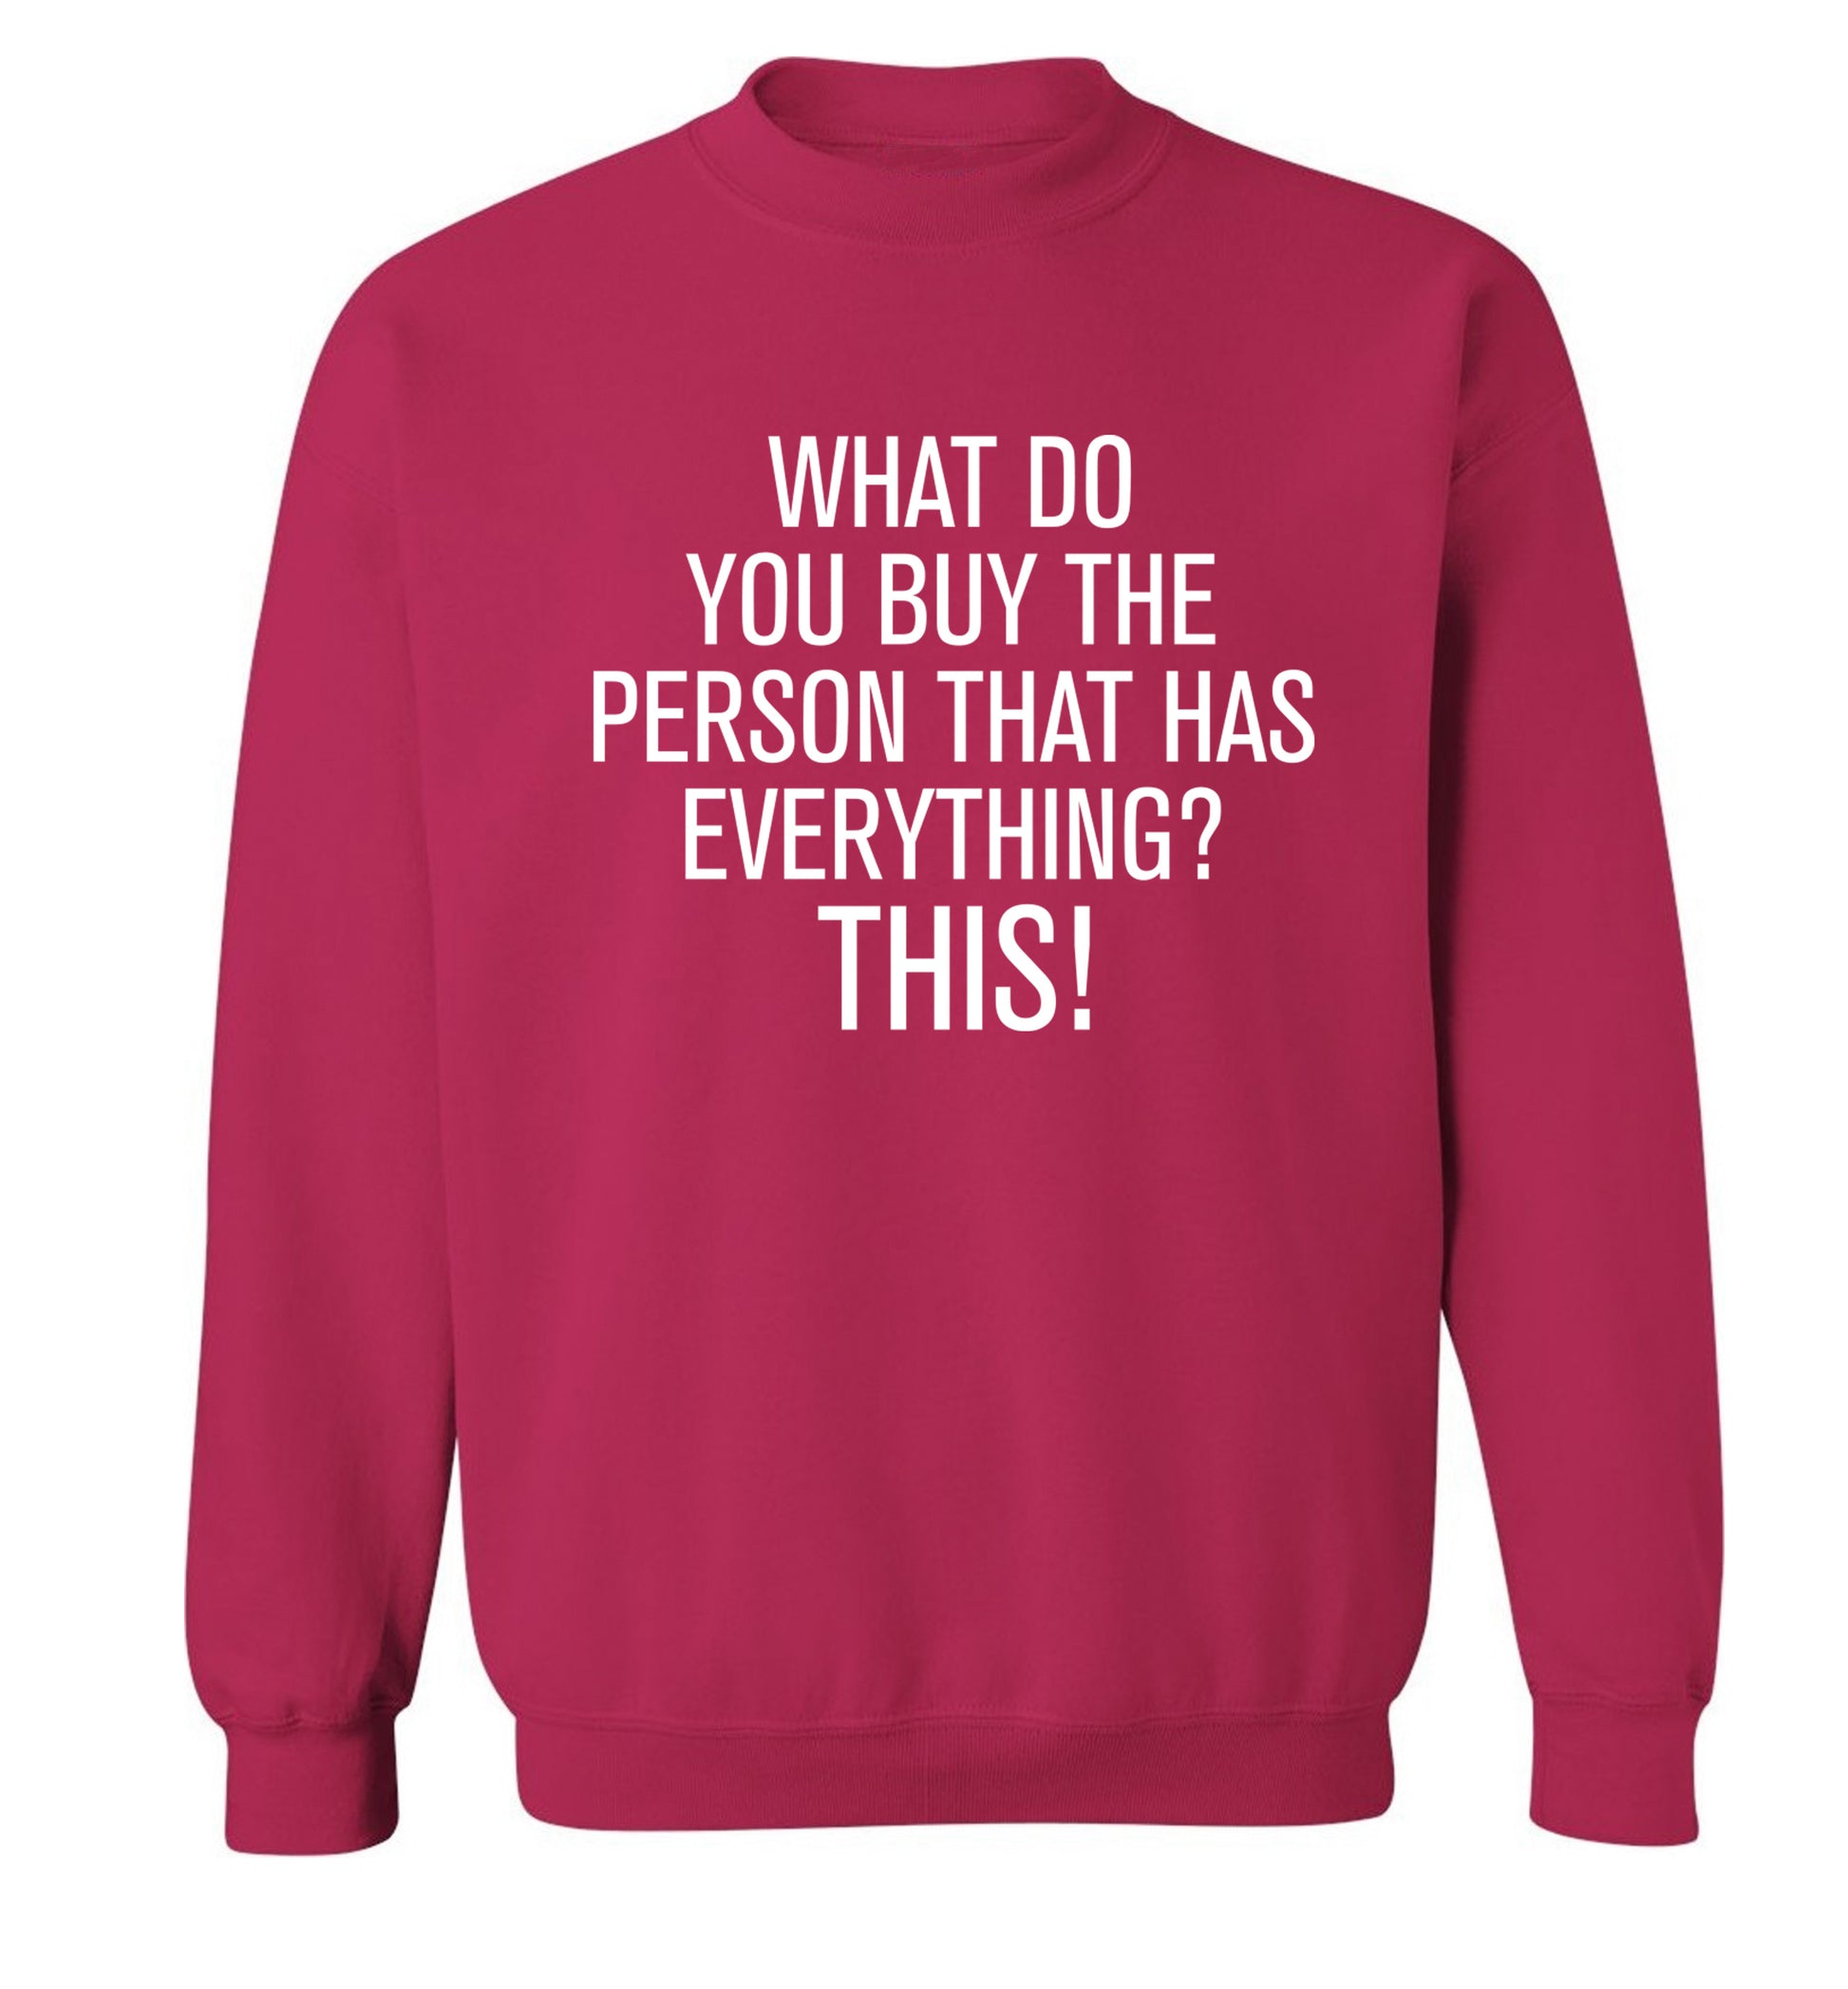 What do you buy the person that has everything? This! Adult's unisex pink Sweater 2XL